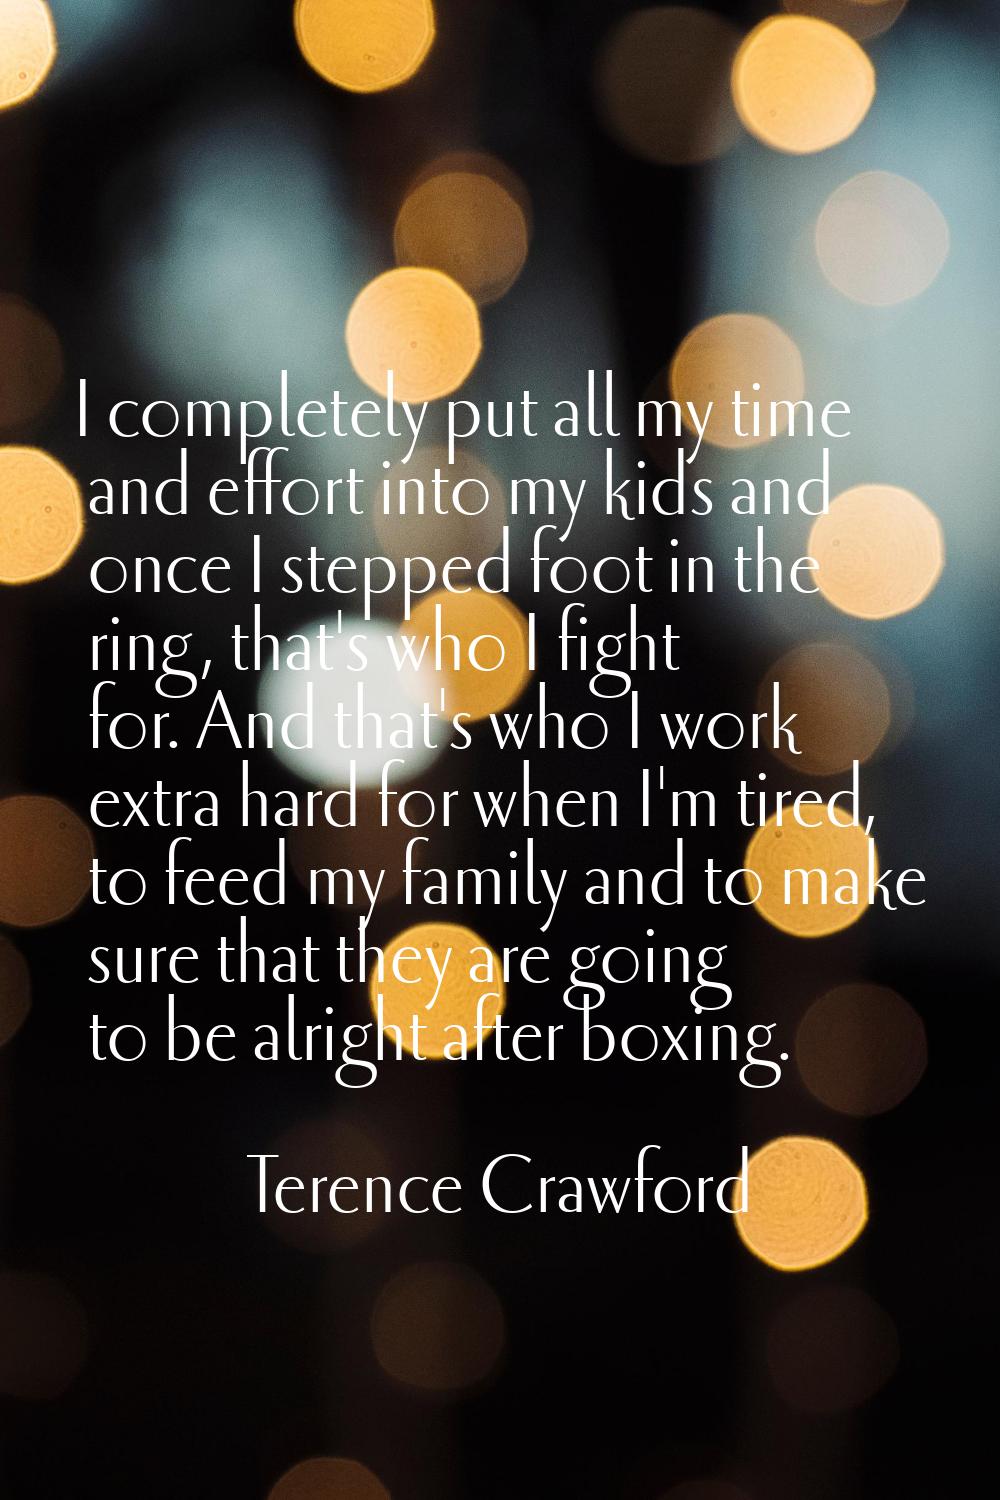 I completely put all my time and effort into my kids and once I stepped foot in the ring, that's wh